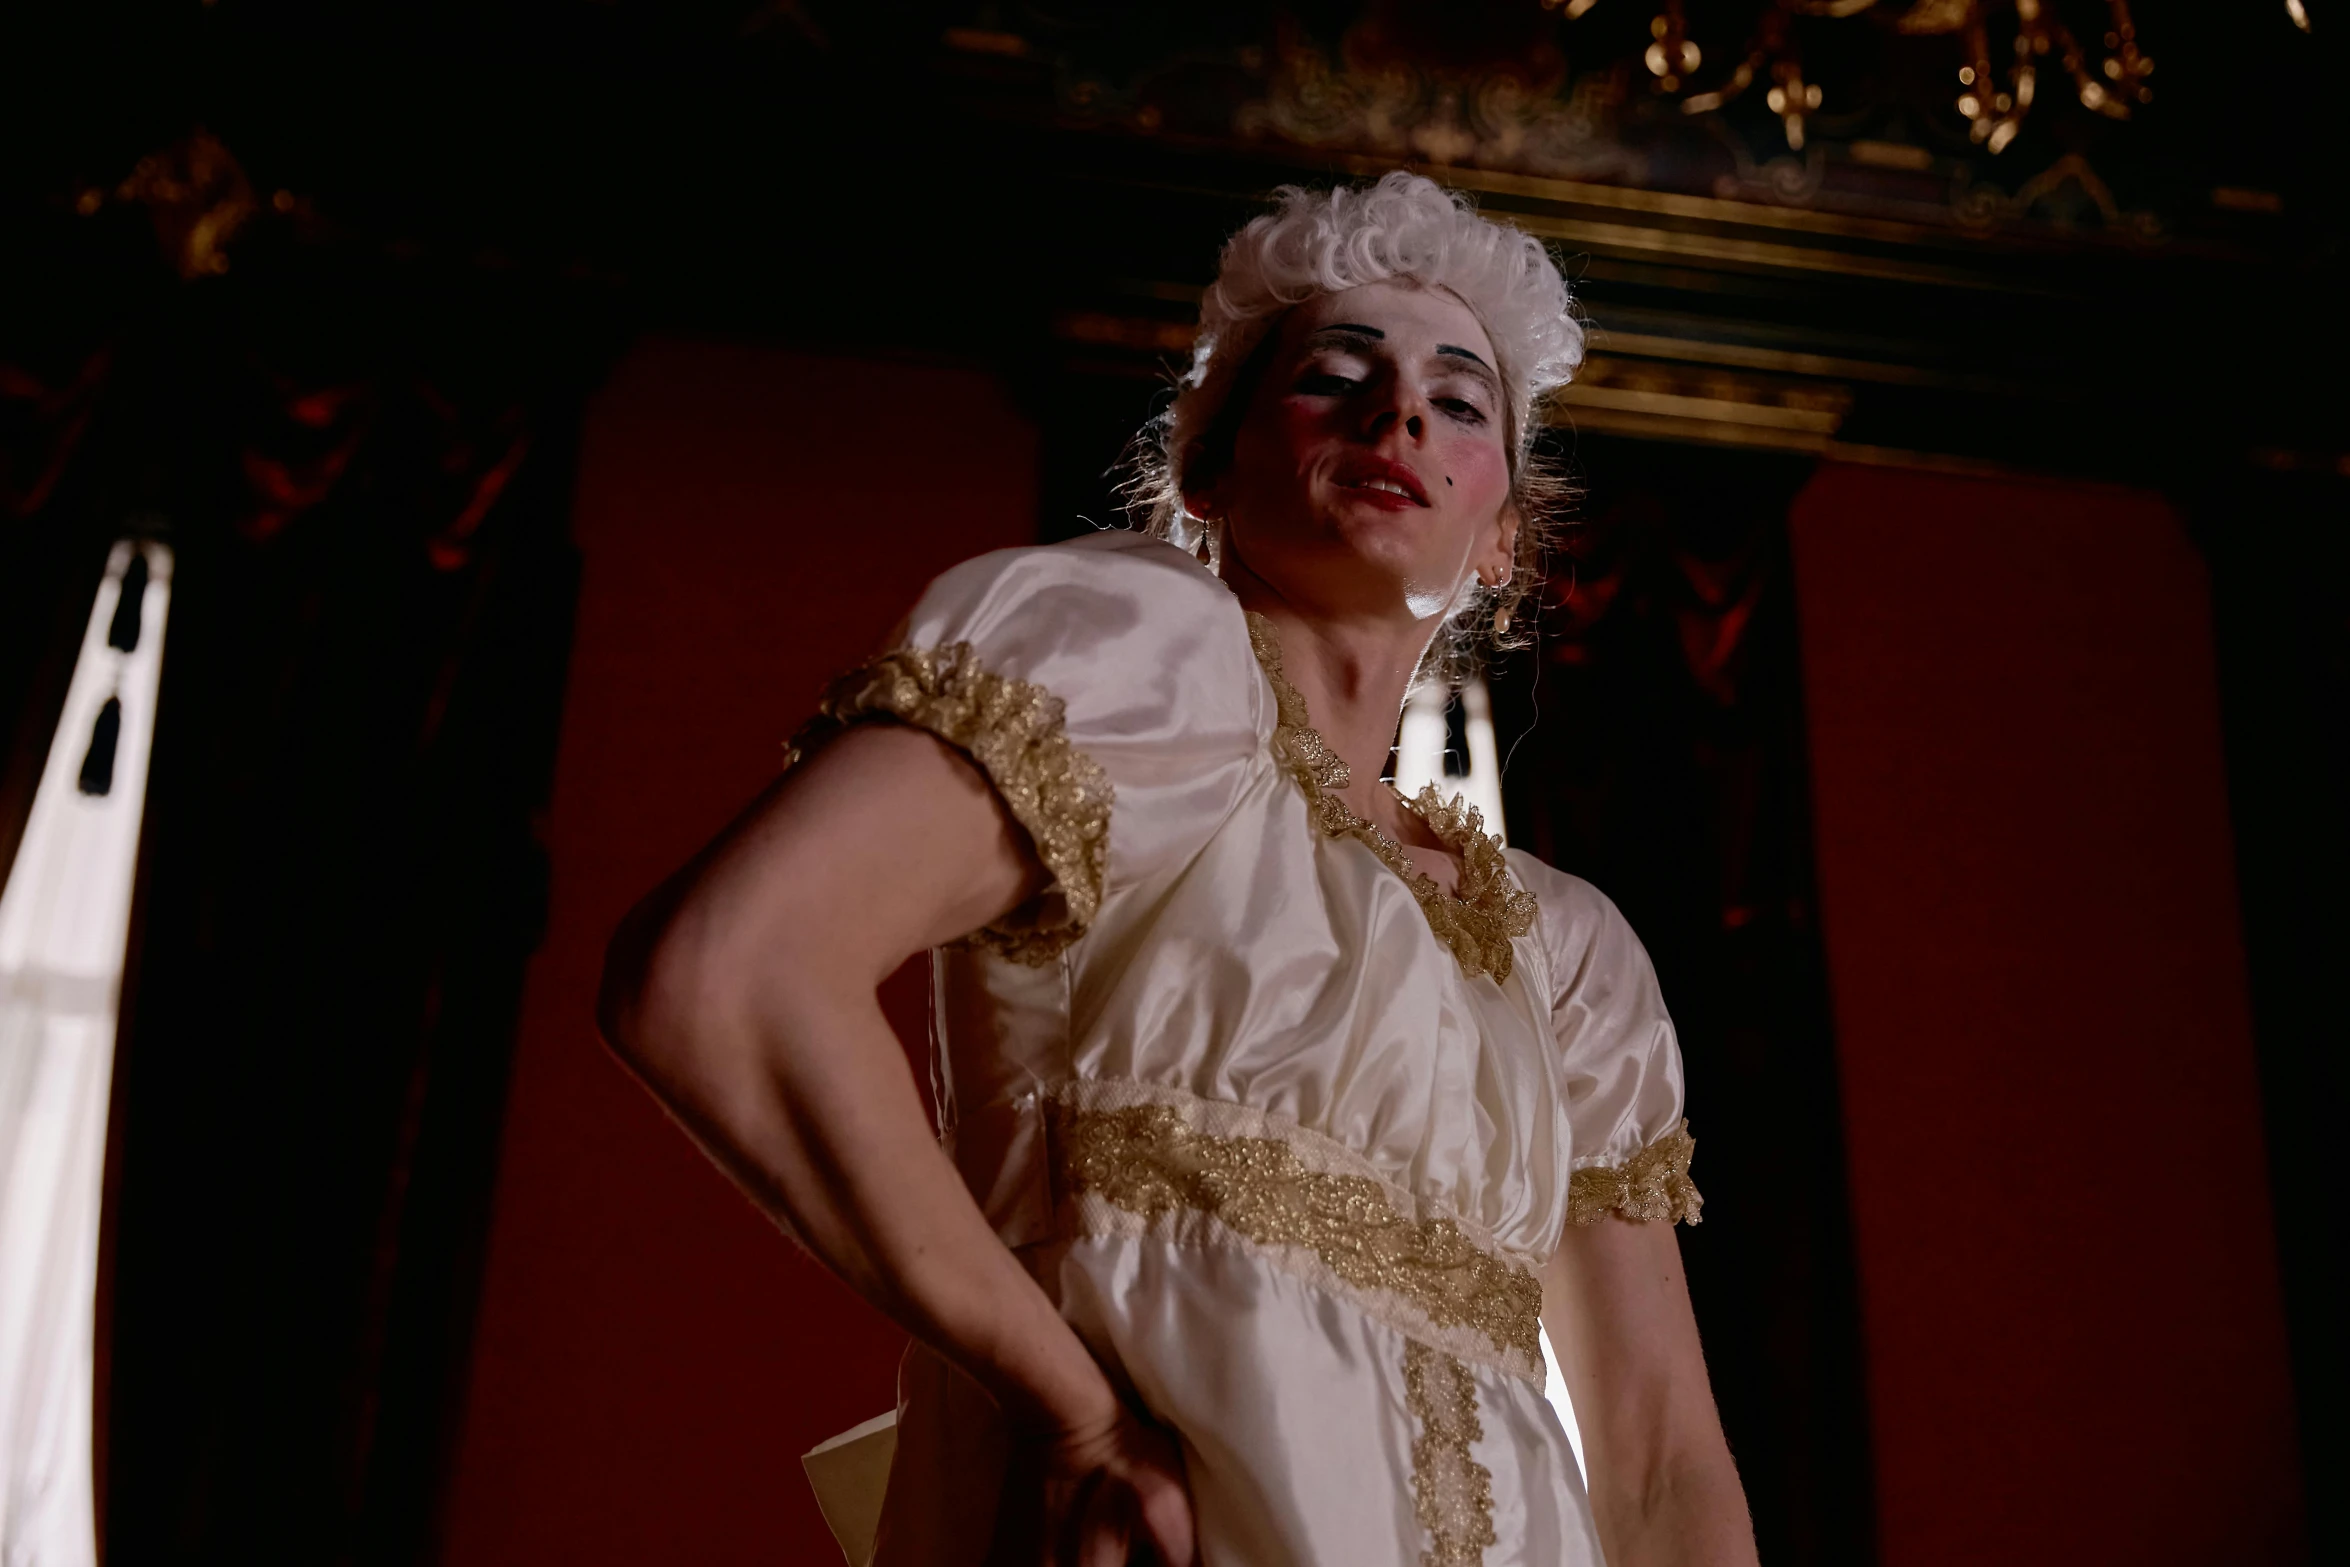 a woman in a white dress standing in a room, inspired by Cindy Sherman, rococo, performance, white facepaint, standing in a dimly lit room, dressed in roman clothes